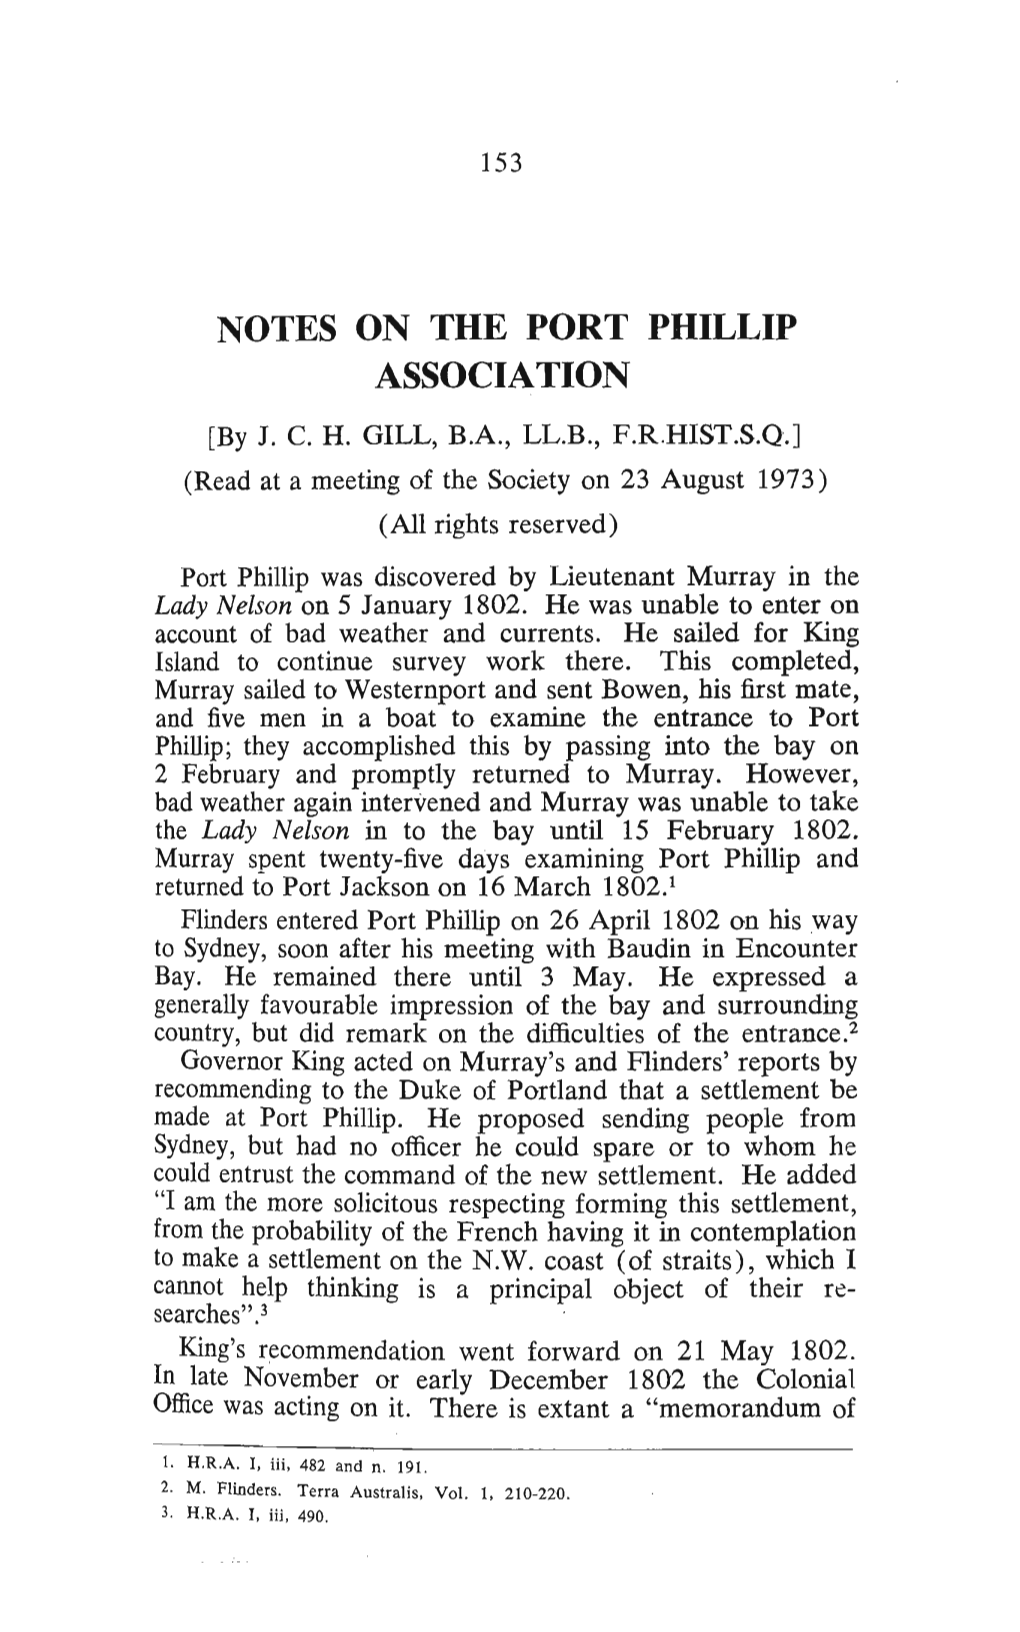 NOTES on the PORT PHILLIP ASSOCIATION [By J